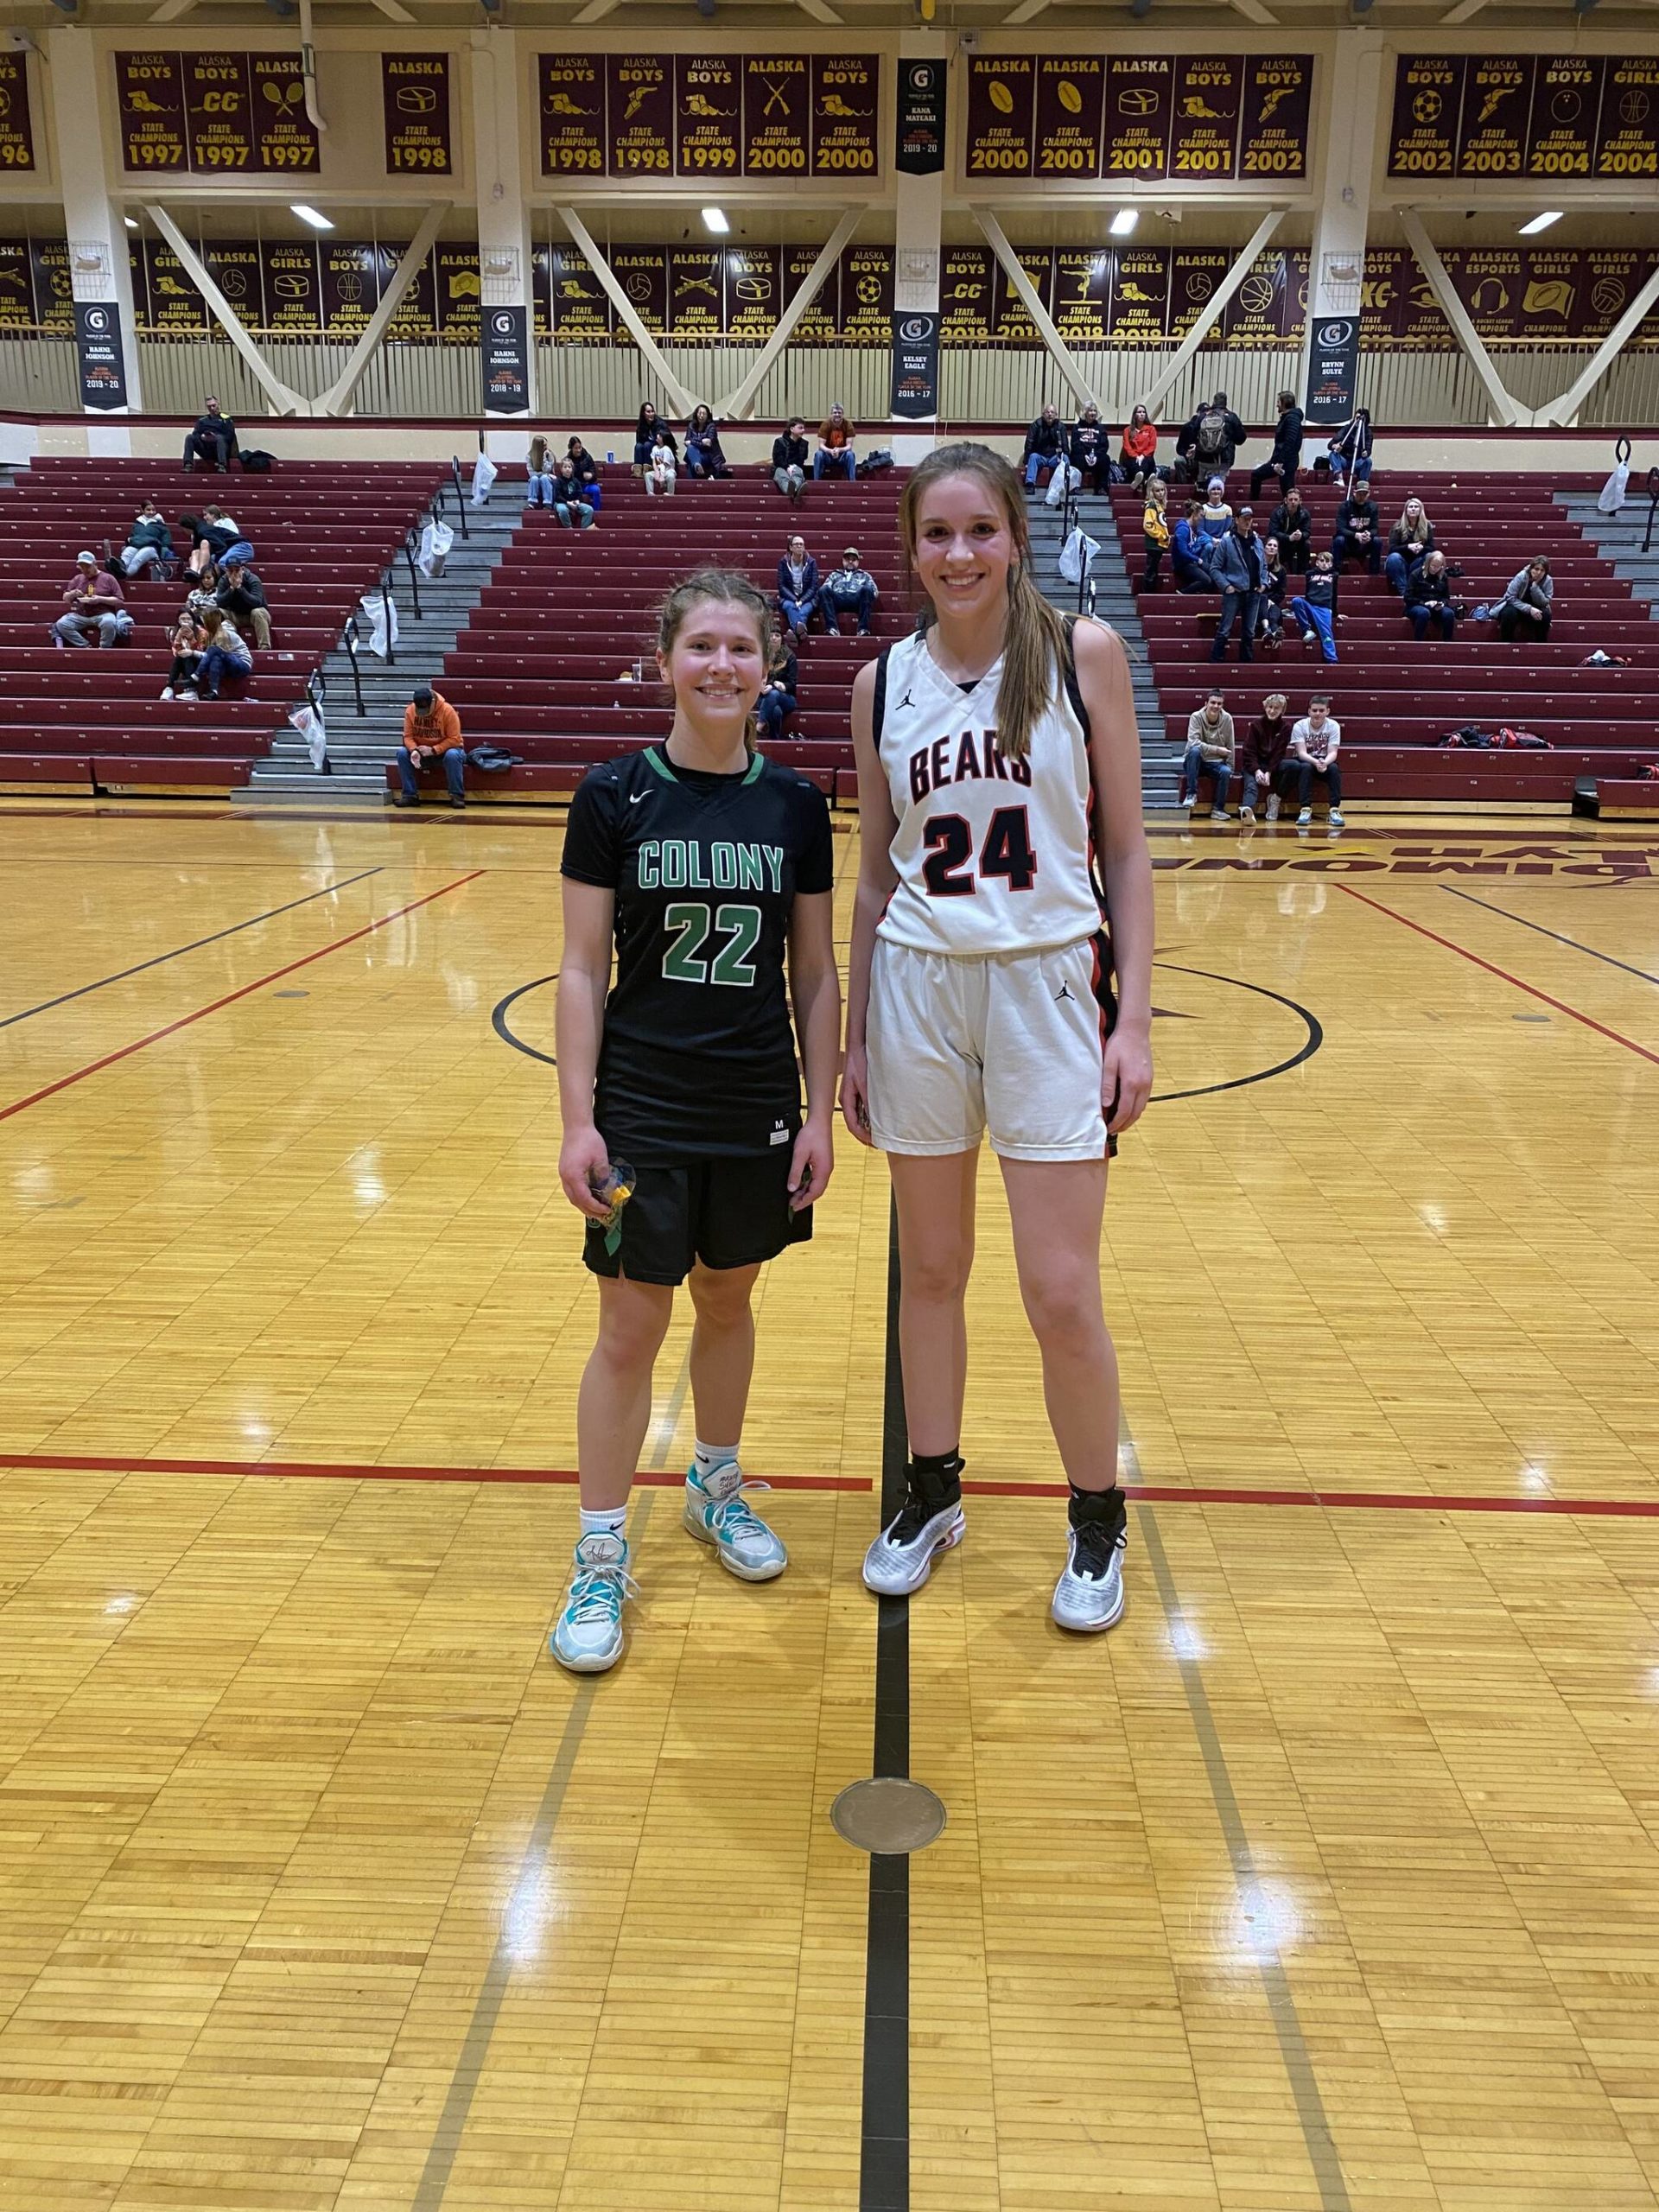 Courtesy Photo / Tanya Nizich 
JDHS junior Mila Hargrave, right, stands for a photo after Friday’s game against Colony High School where Hargrave earned Player of the Game while leading her team in points for a total of 11.